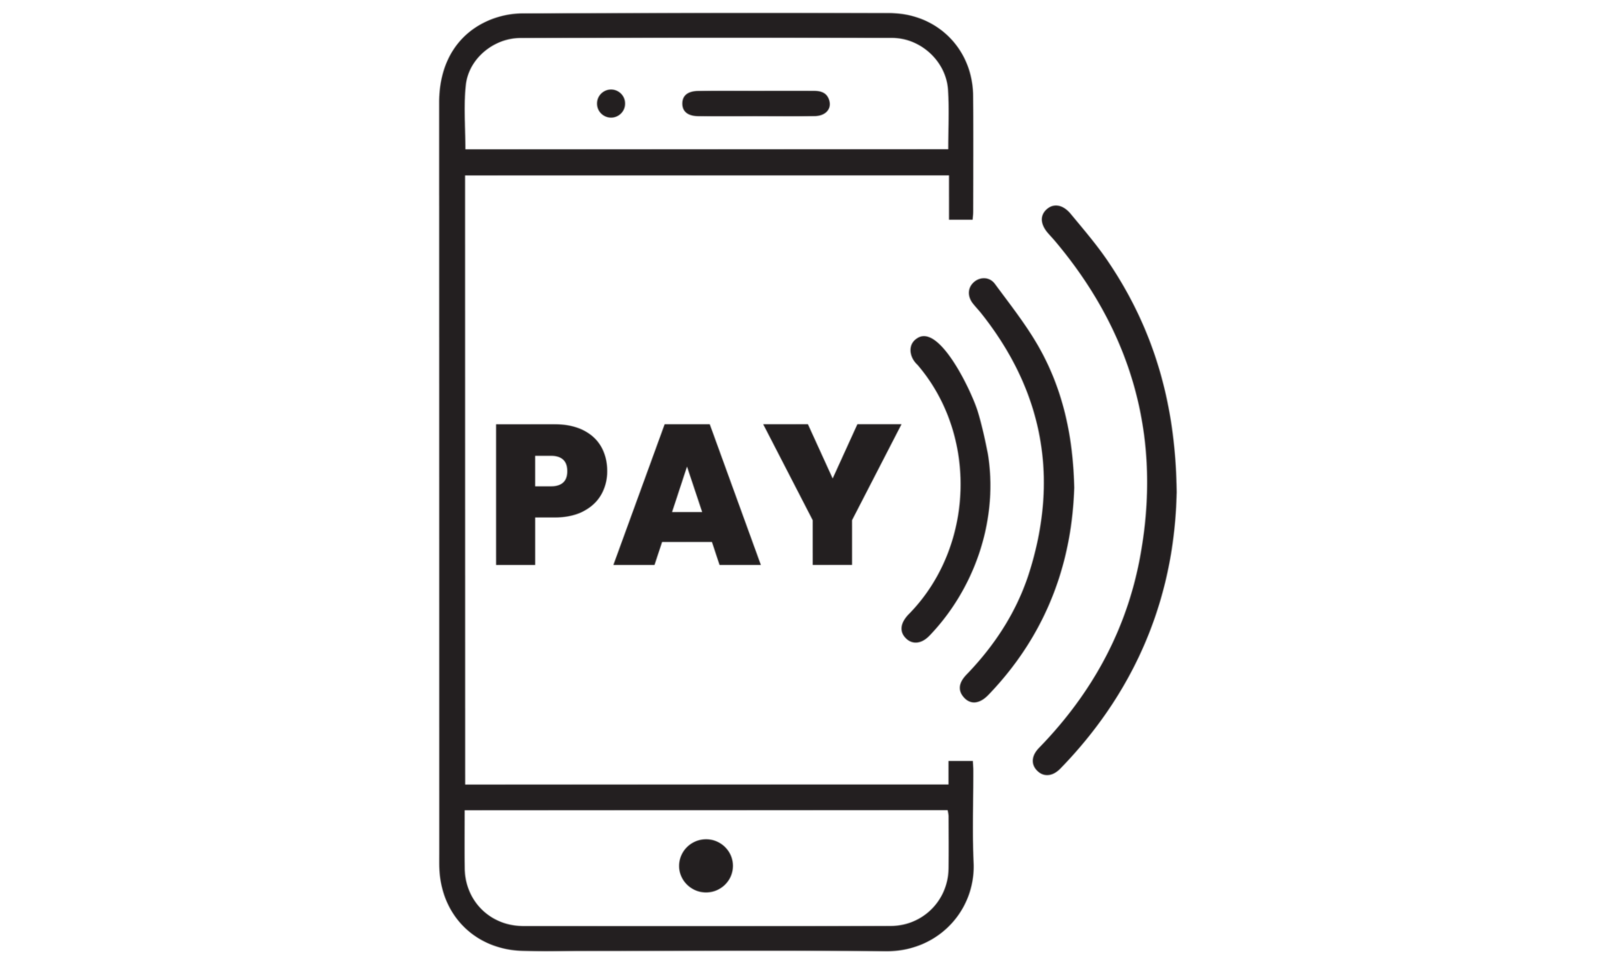 Payment with smartphone icon on transparent background. png